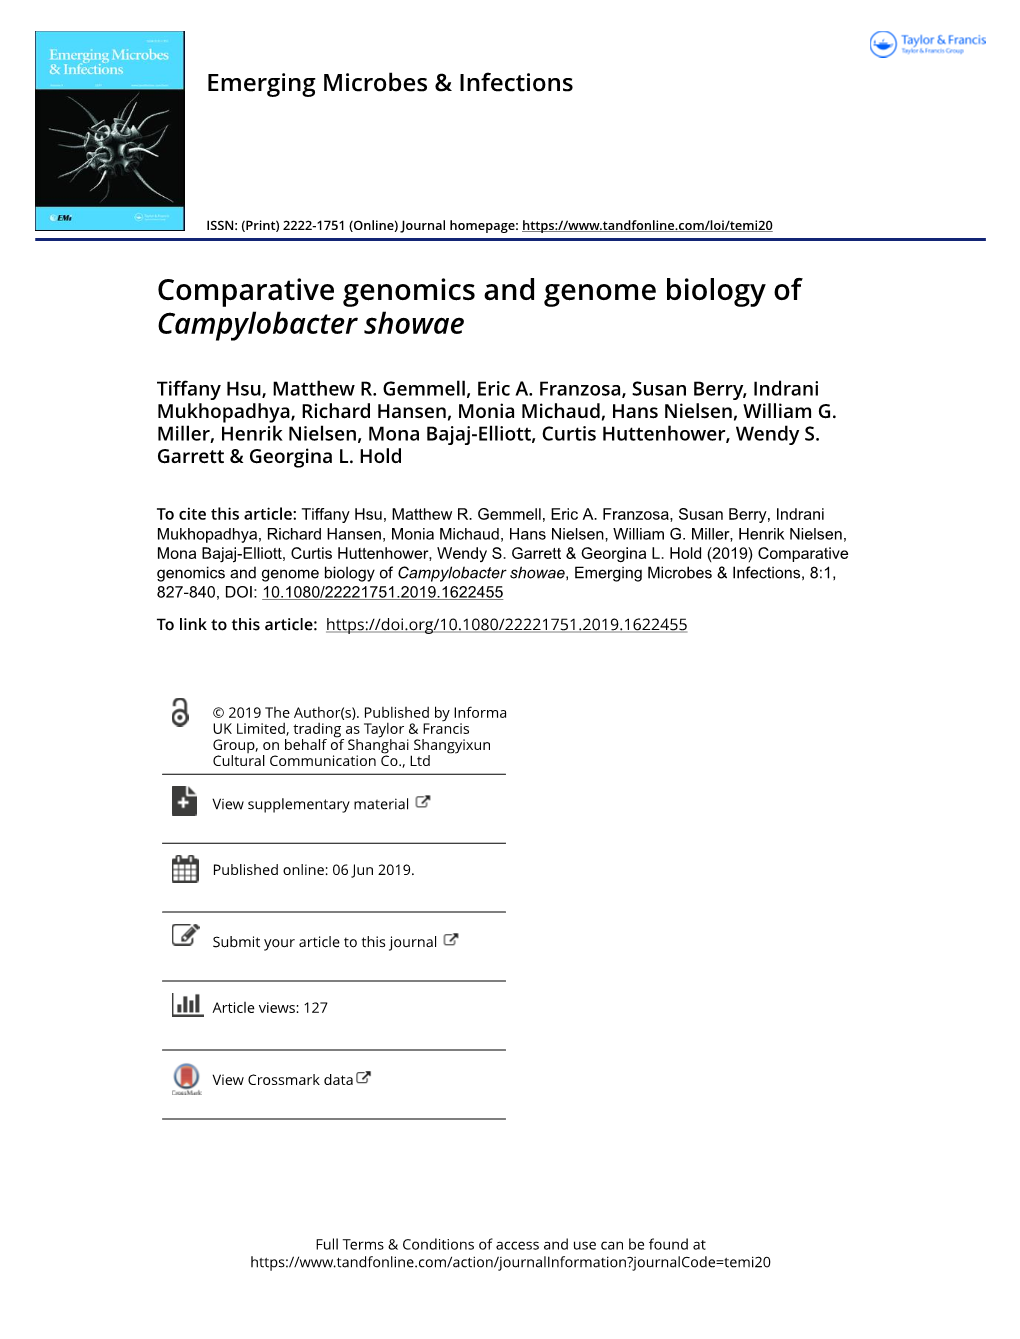 Comparative Genomics and Genome Biology of Campylobacter Showae